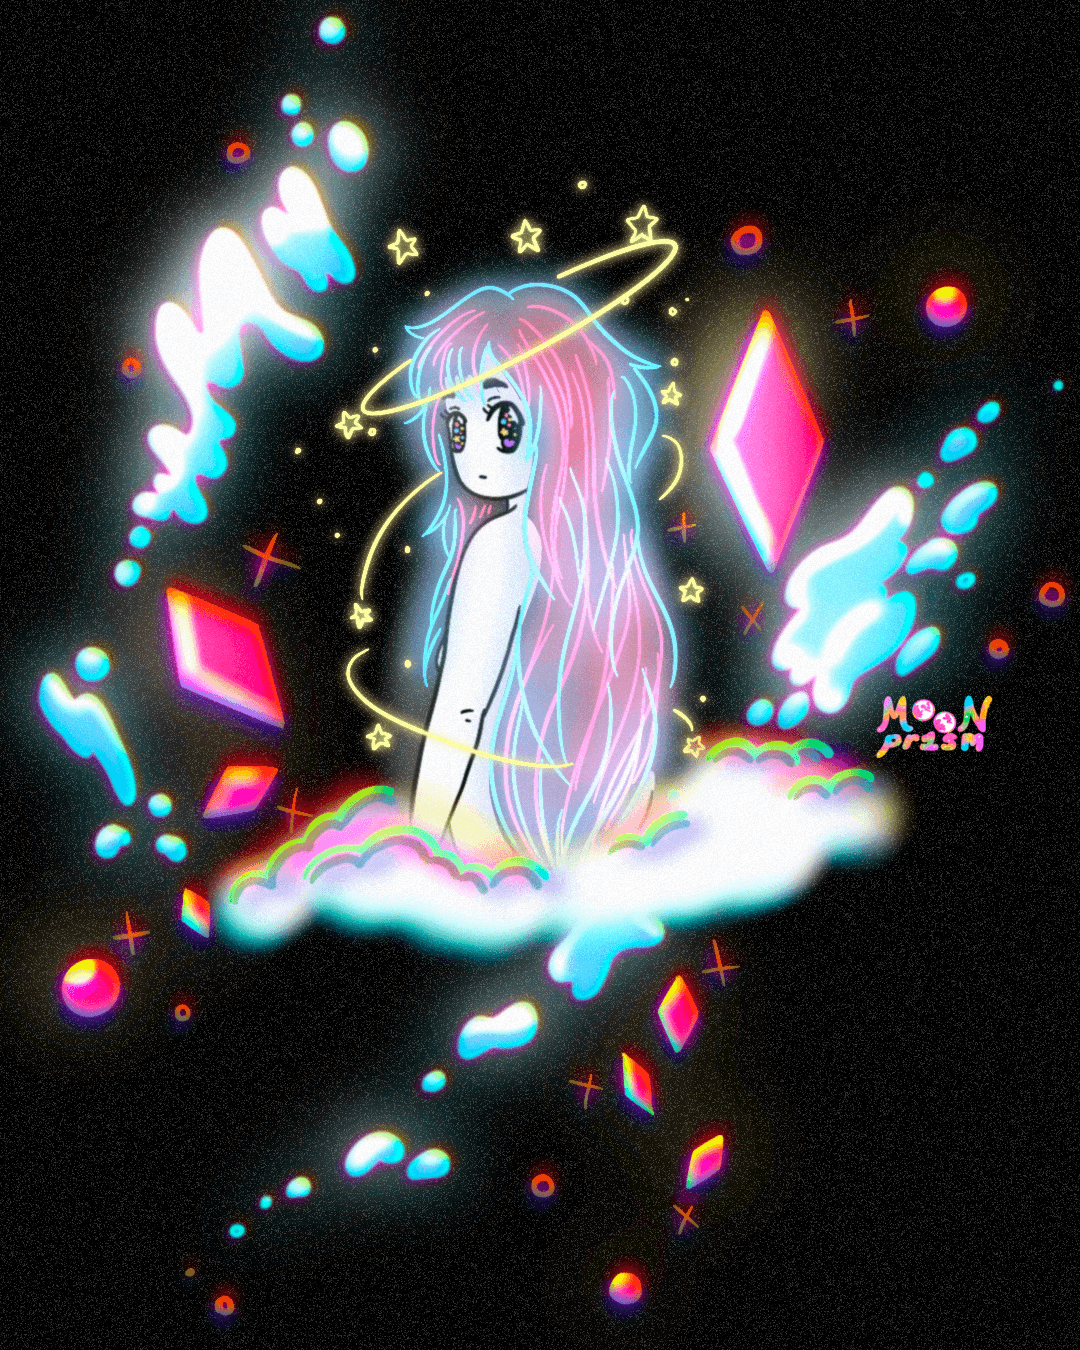 An illustration of a character with large eyes and an enigmatic expression. They appear to be made of white, pink and blue light. They are surrounded by a spiraling gold halo of stars. There are glowing pink diamond and sparkle shapes with blue liquid shapes around them on a black background. They are looking back at you over their shoulder curiously.